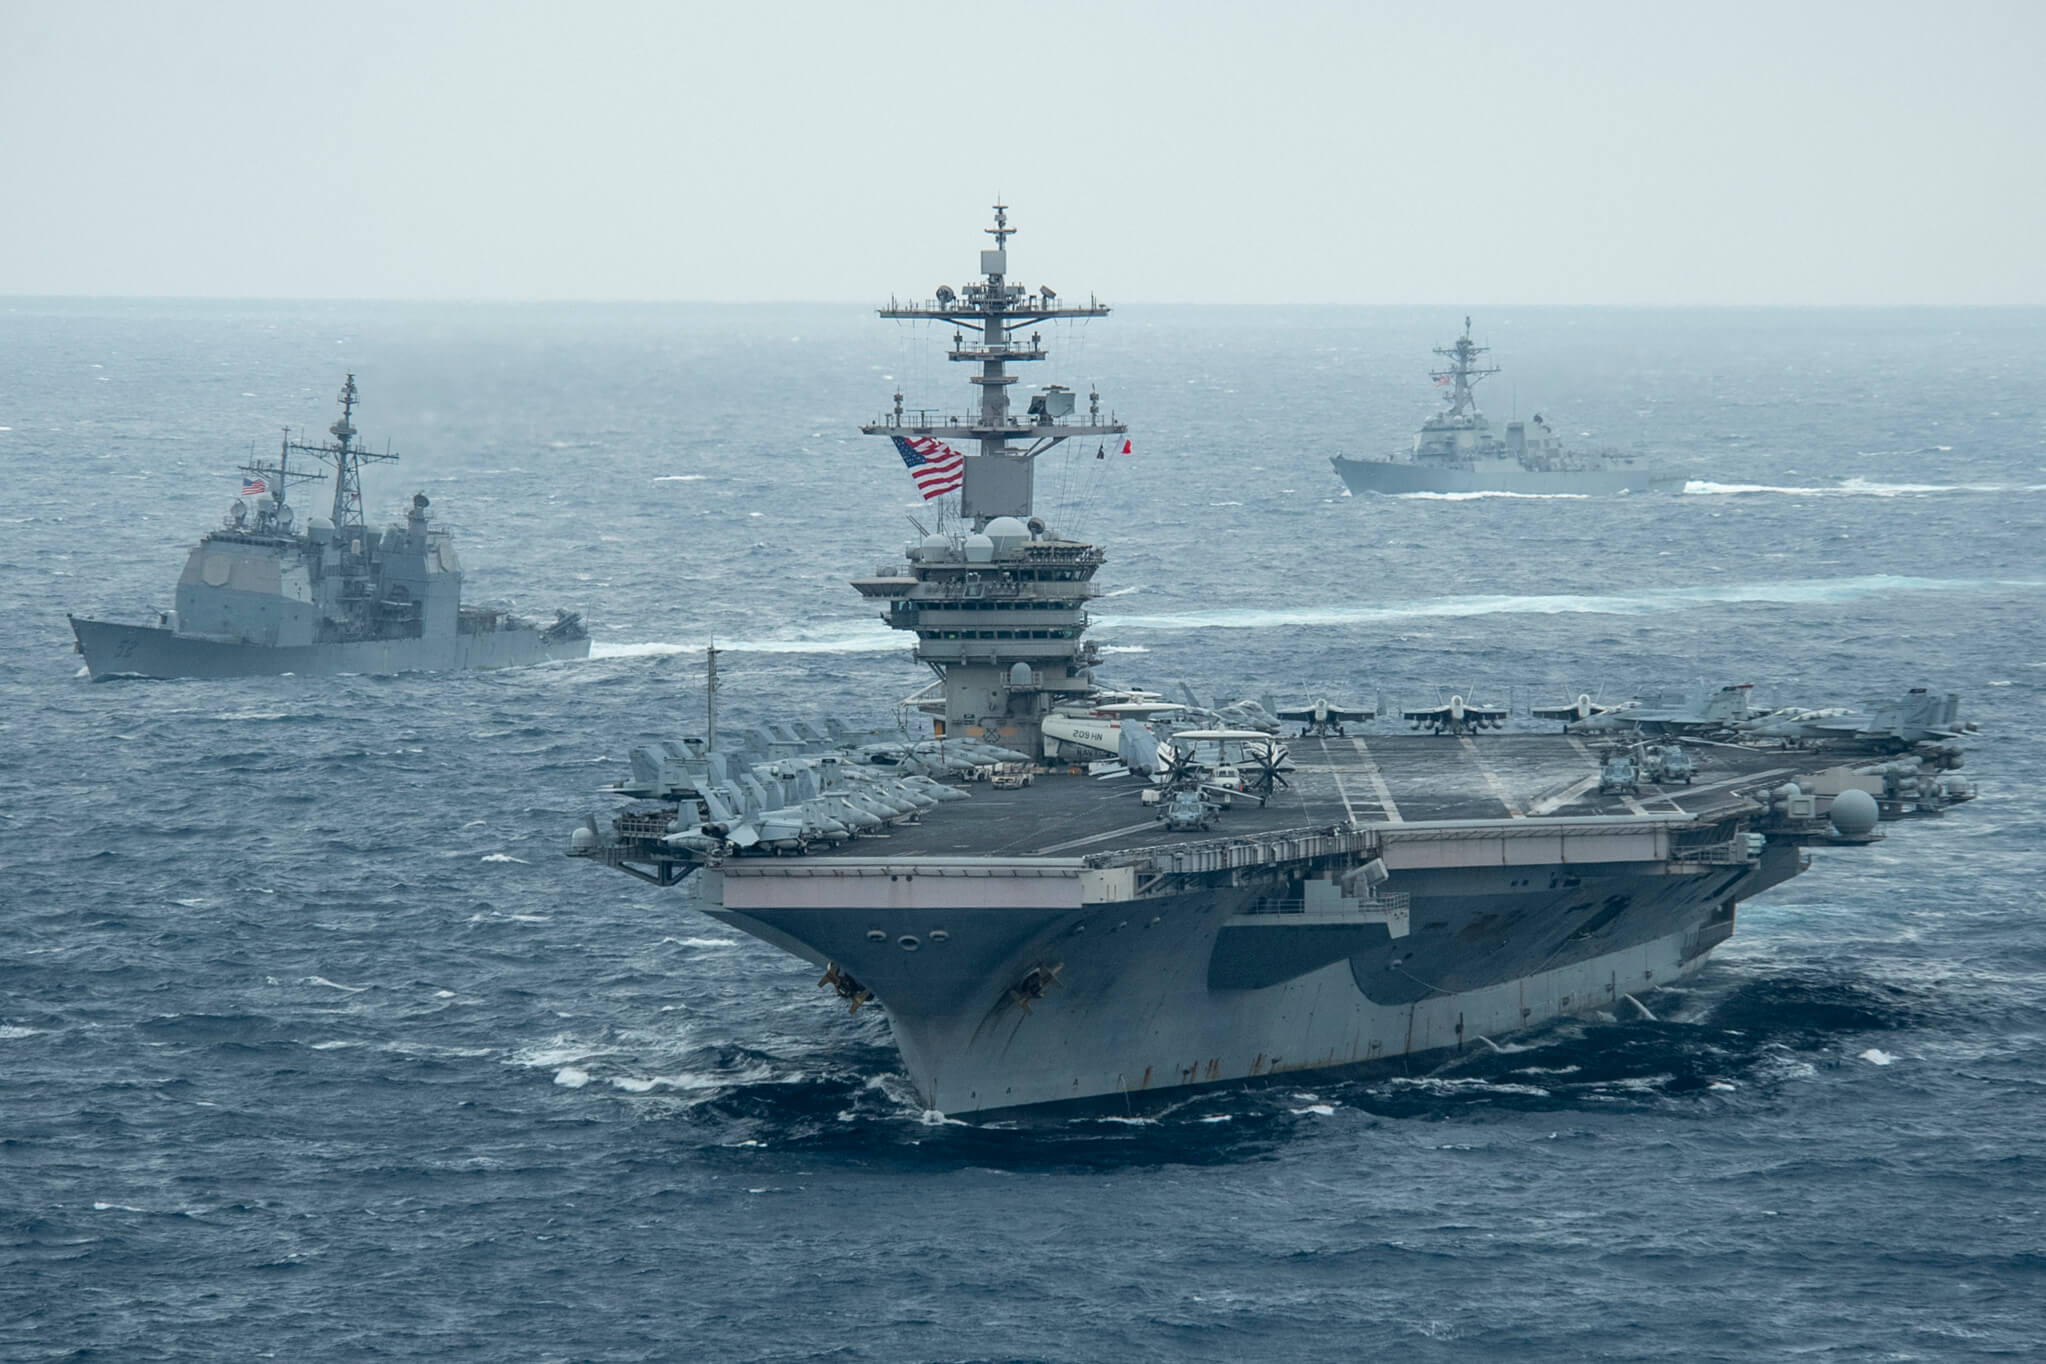 Lindley-French-The aircraft carrier USS Theodore Roosevelt in the front, the USS Bunker Hill left and guided-missile destroyer USS John Finn transit the Pacific Ocean in January 2021.